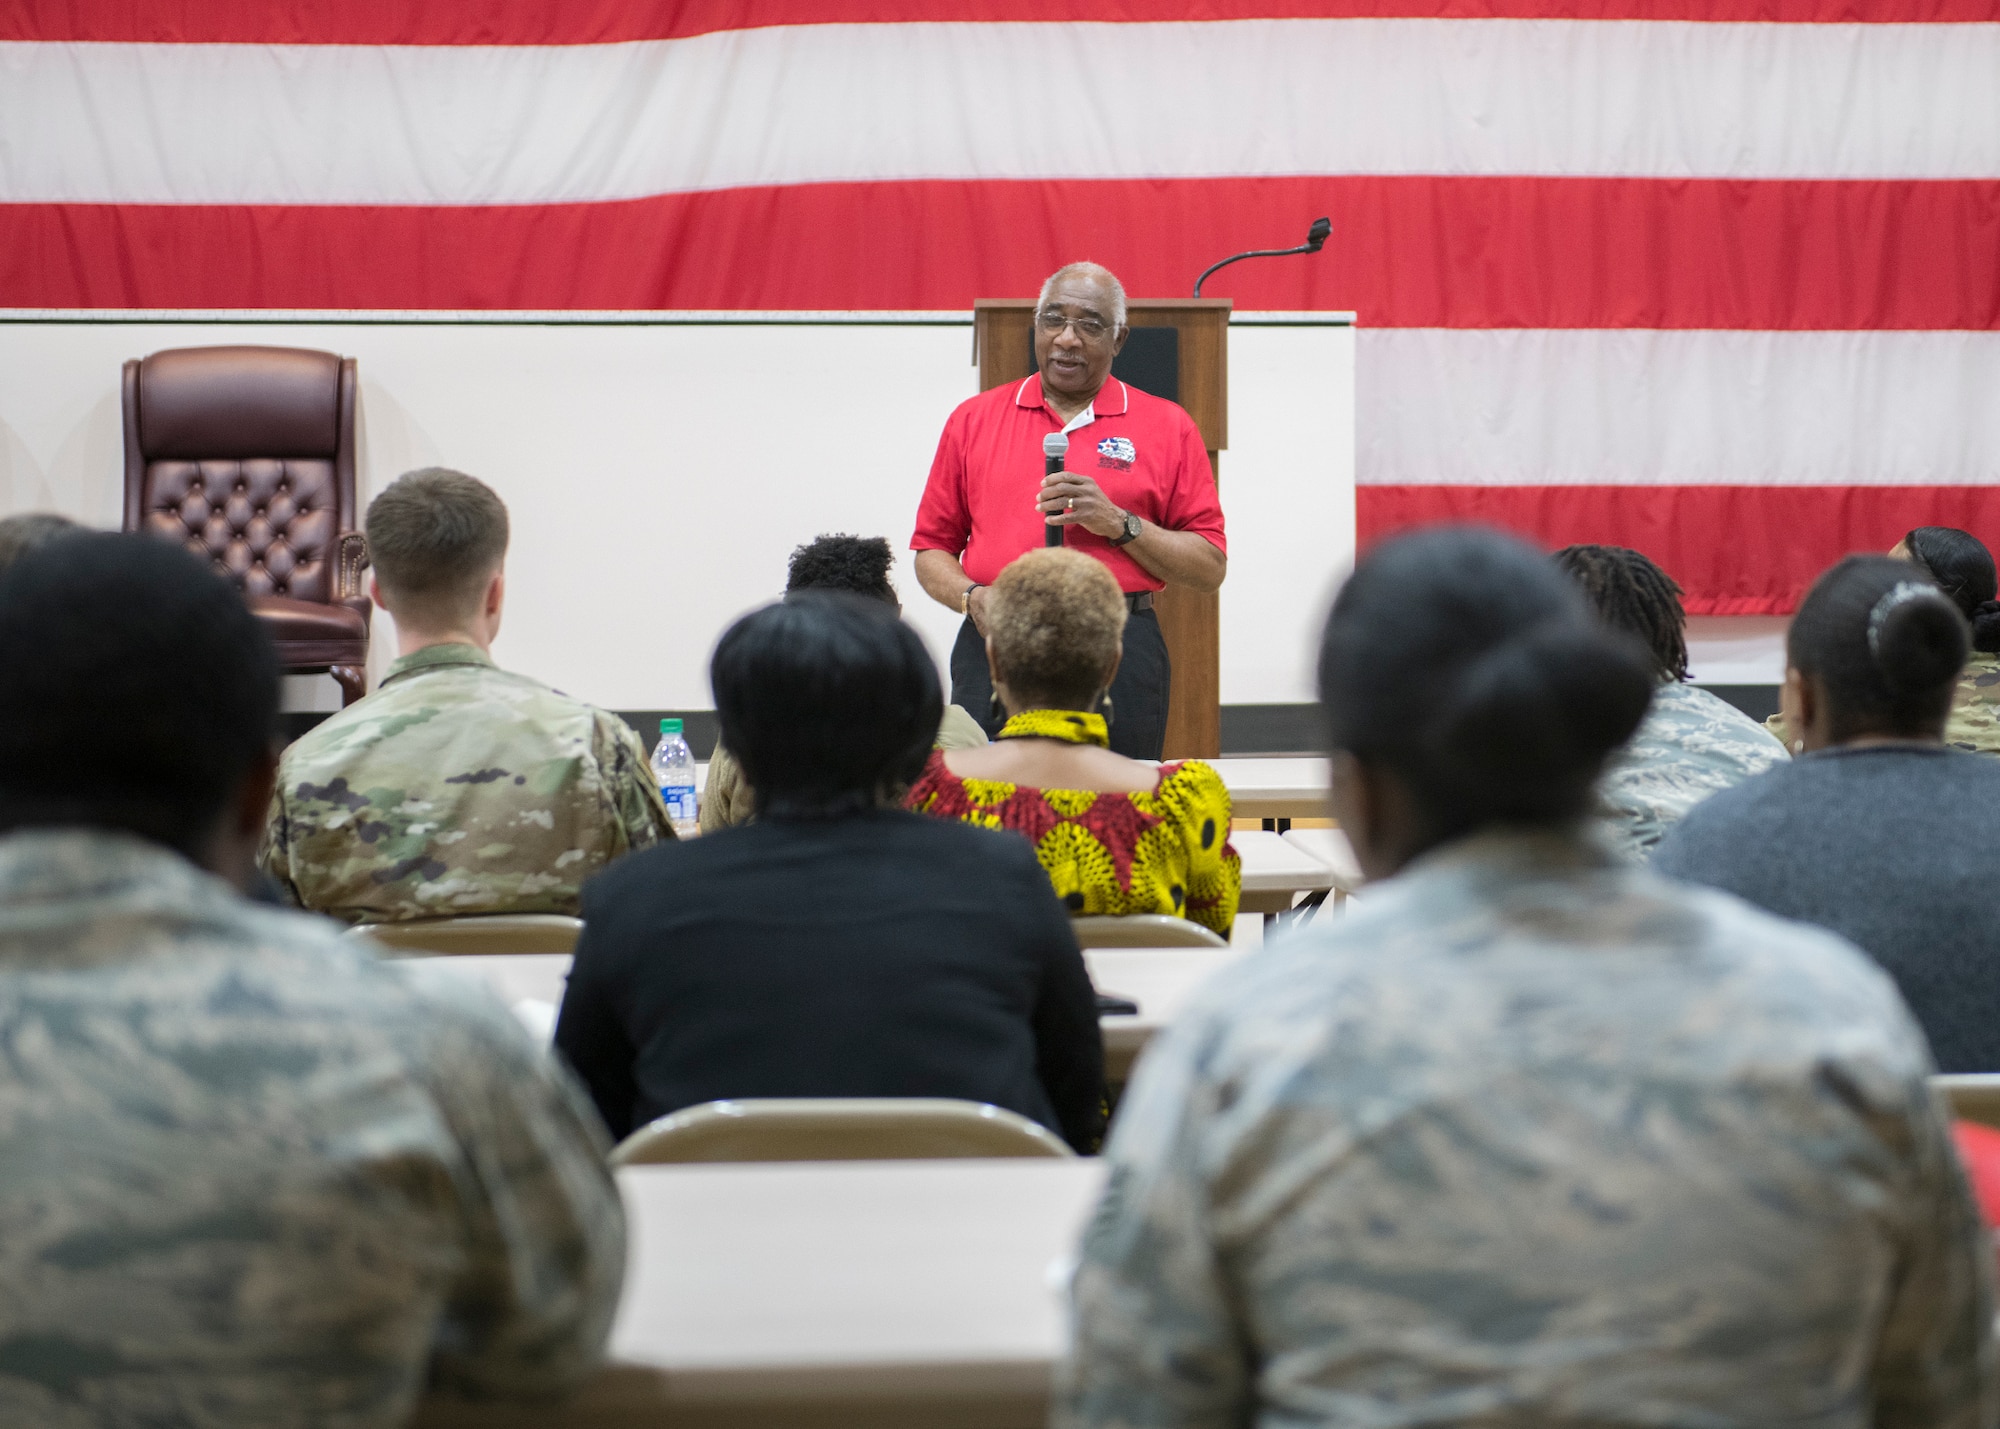 Retired U.S. Air Force Col. Richard Toliver, member of the Archer-Ragsdale Arizona chapter of Tuskegee Airmen Incorporated, speaks during a Black History Month panel discussion Feb. 27, 2020, at Luke Air Force Base, Ariz.